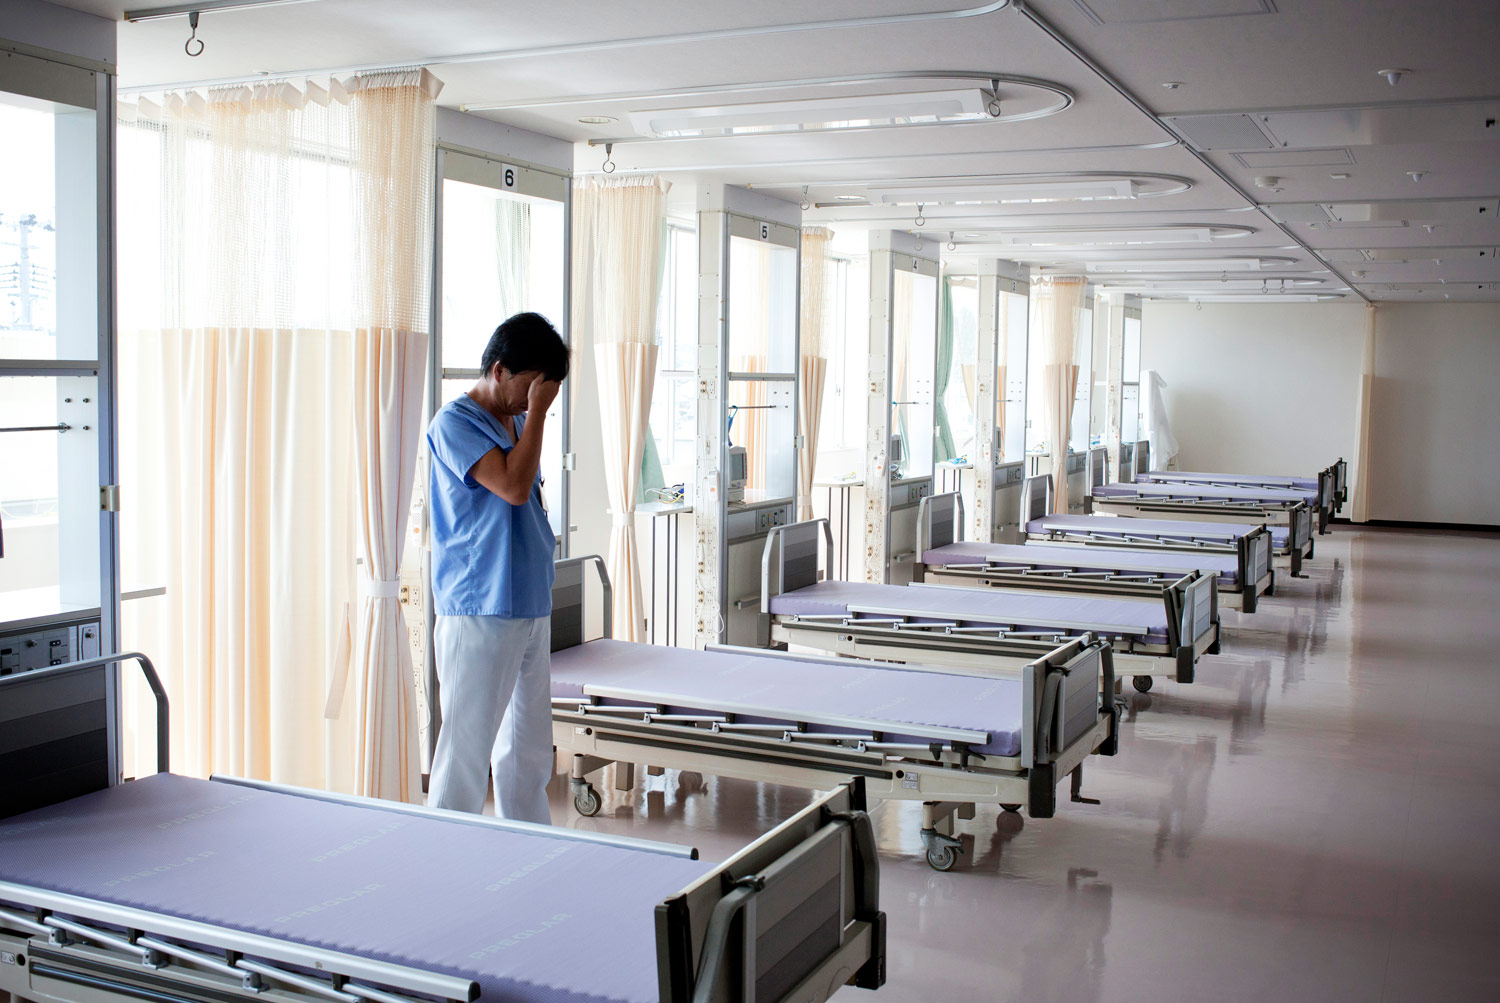 Manabu Takano visits the empty intensive care unit at Watanabe hospital. The unit had to be closed because of the lack of staff. Takano, head nurse at Watanabe, chose not to evacuate and tries to give patients who still come in what care he can.